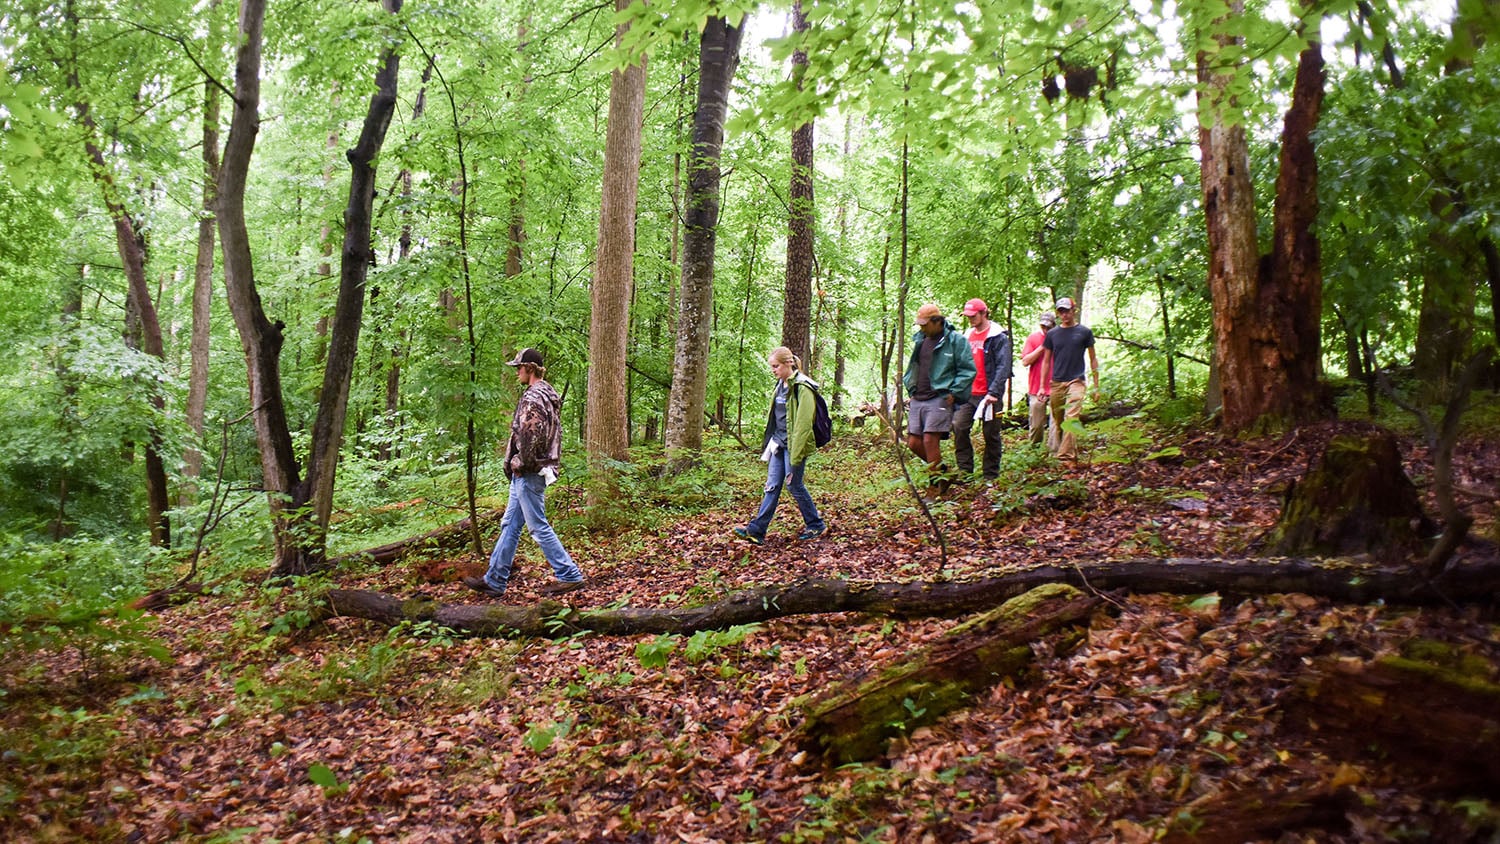 Students walk through a forest.